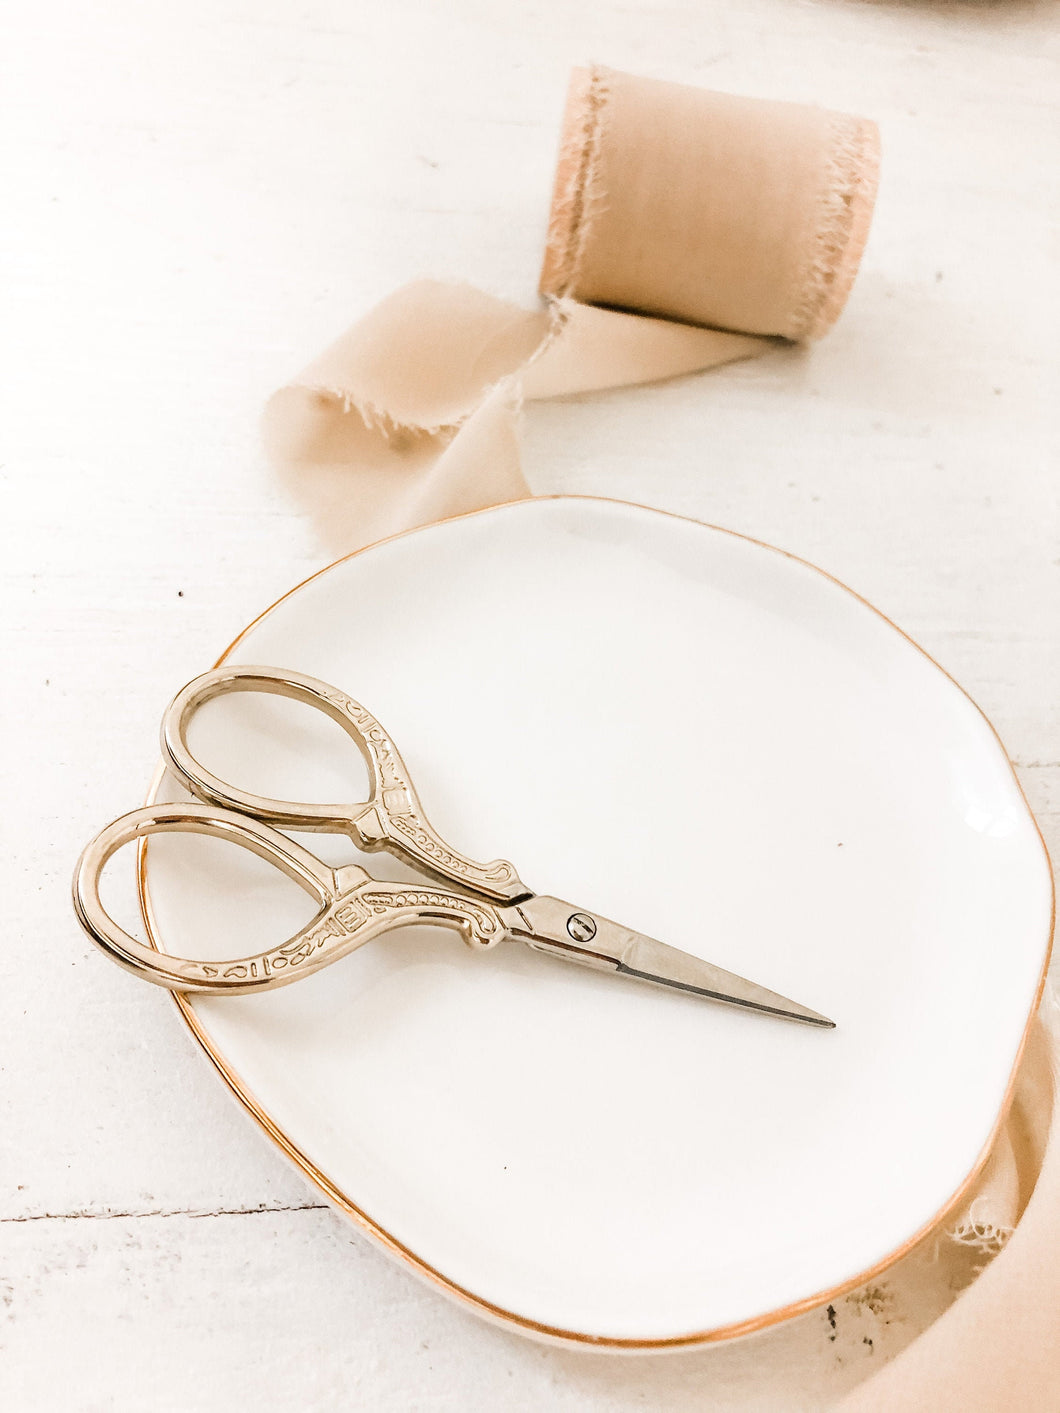 Vintage Gold Scissors Antique Photography Styling Prop for Flat Lays